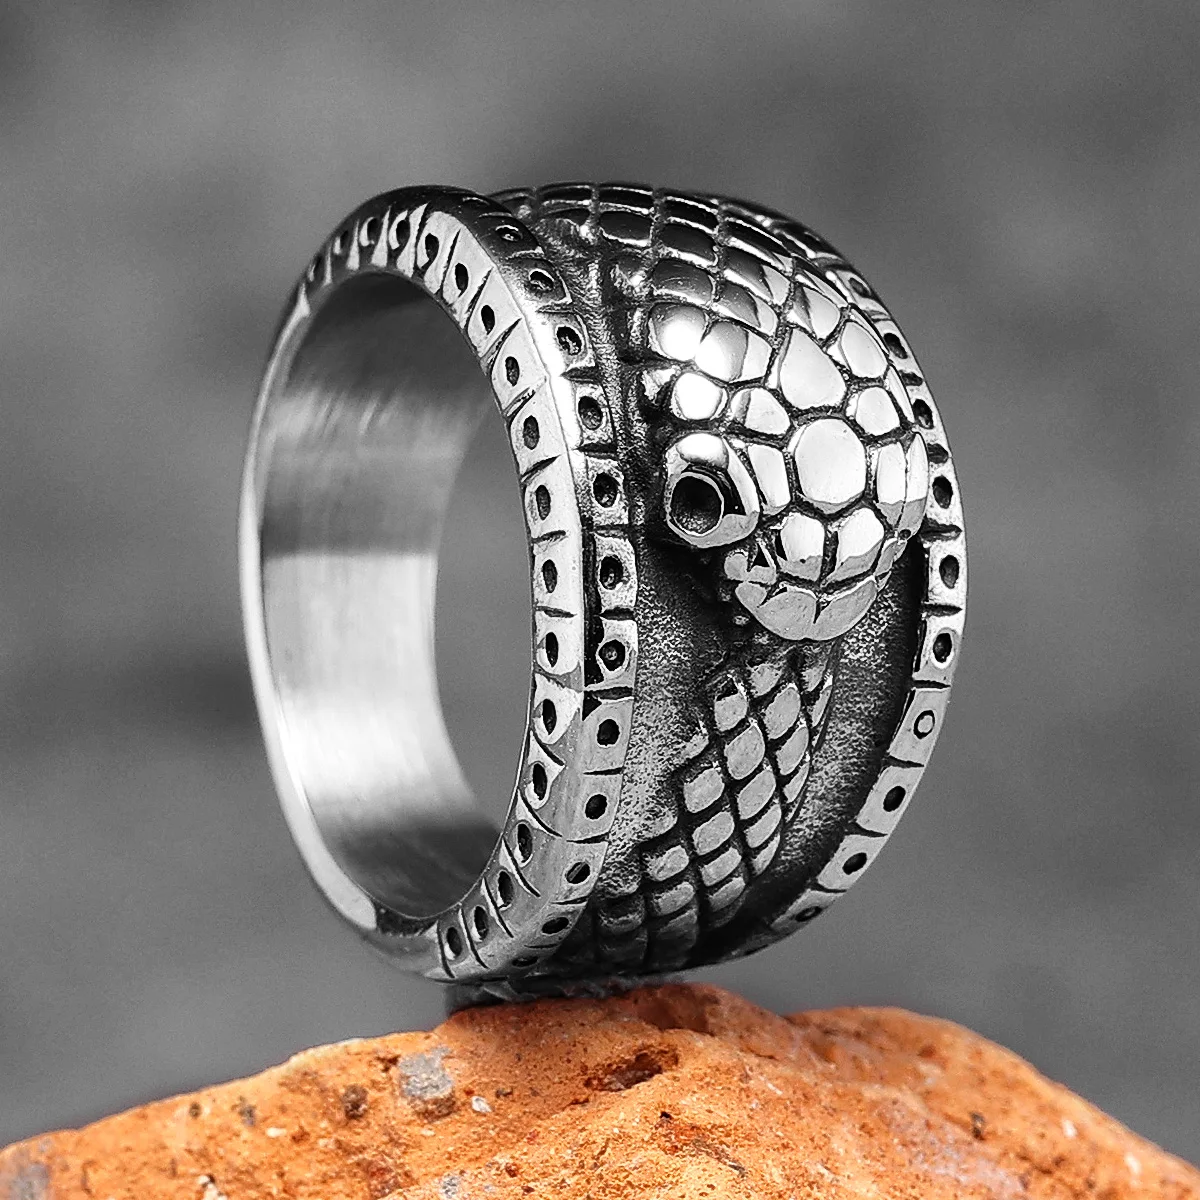 

Ouroboros Snake Animal Stainless Steel Mens Women Rings Punk HipHop Trendy for Male Biker Jewelry Creativity Gift Wholesale